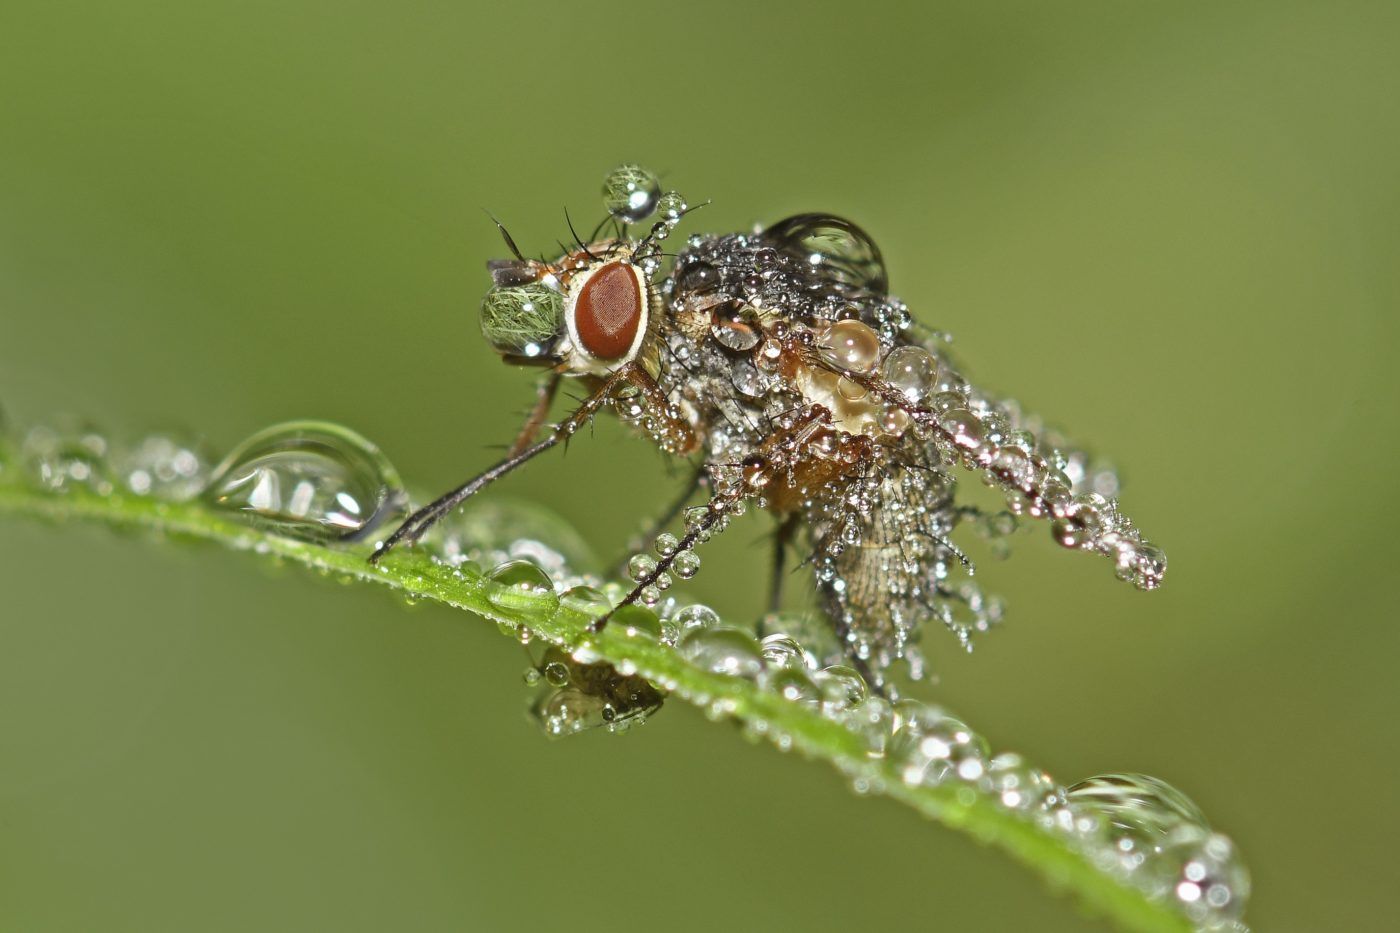 Fly covered in water droplets on a green leaf